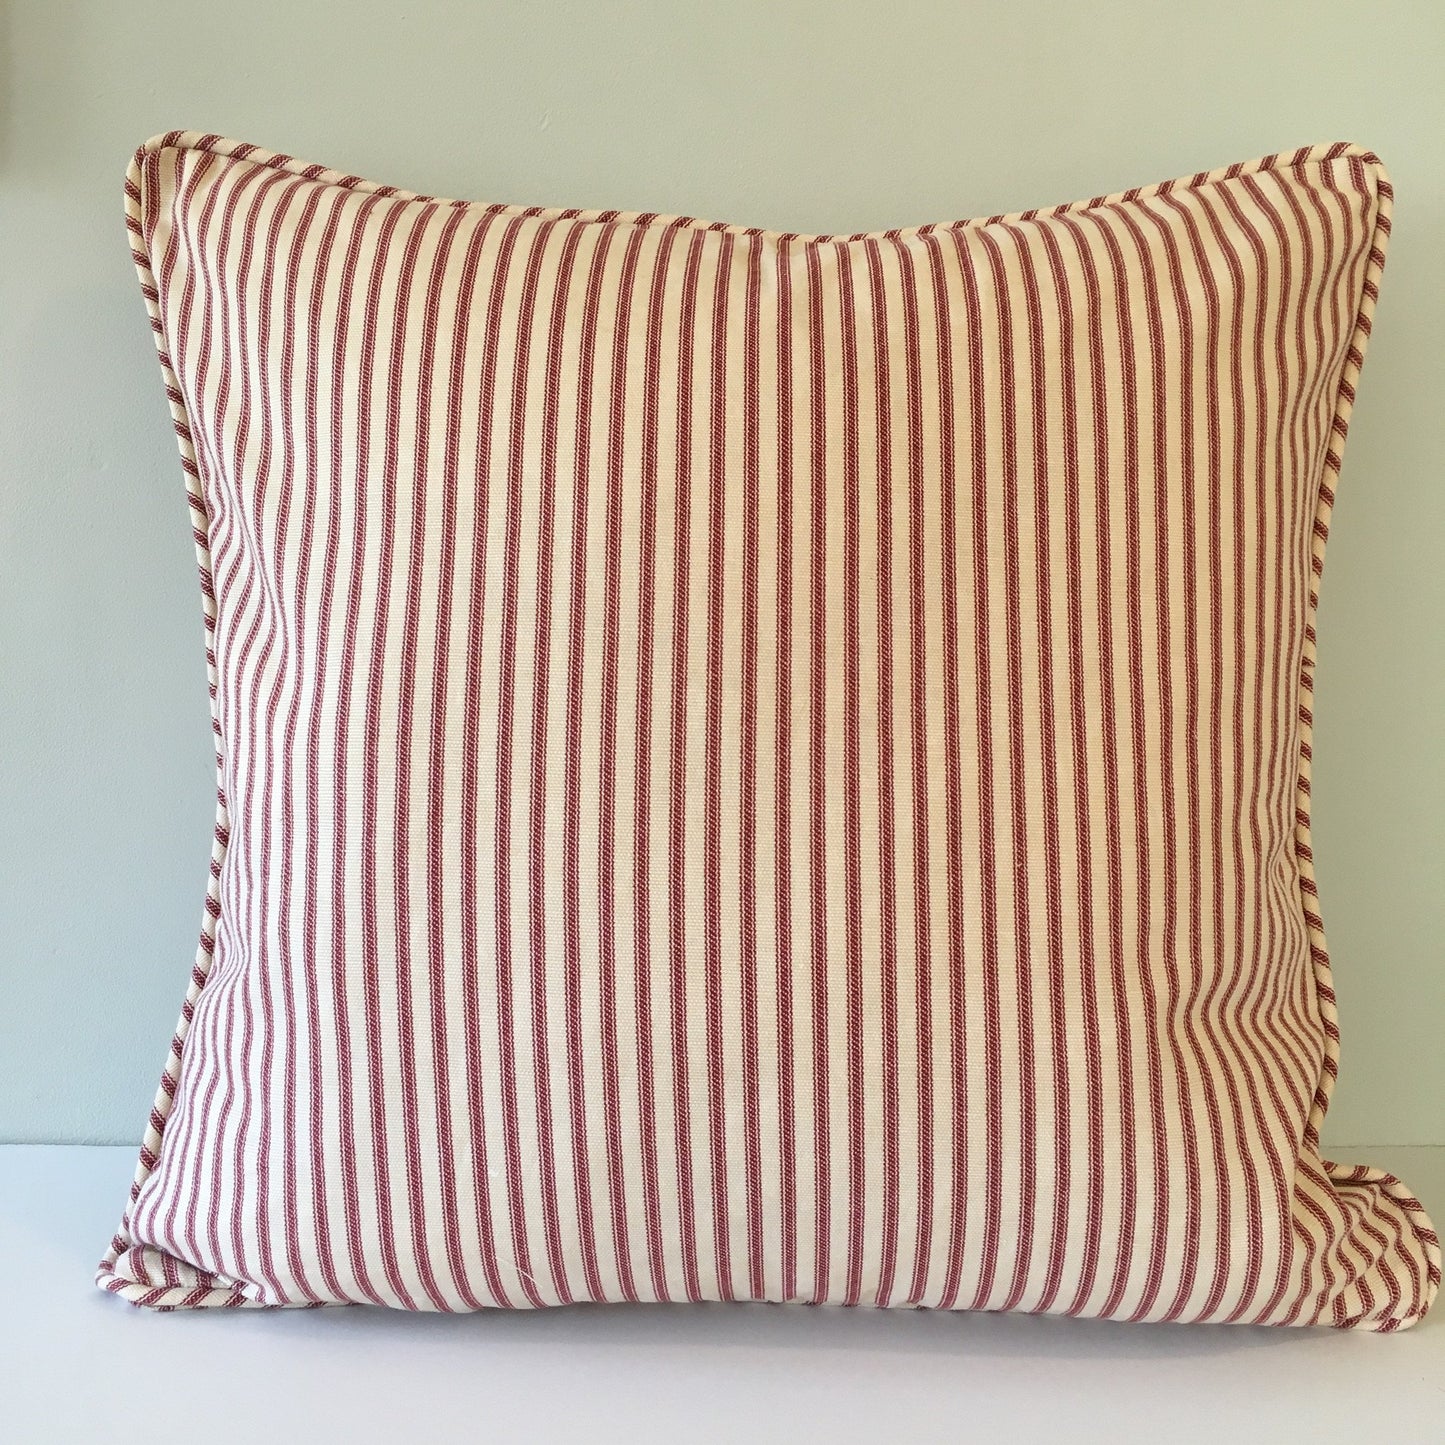 Red Ticking Stripe Throw Pillow Cover 18x18